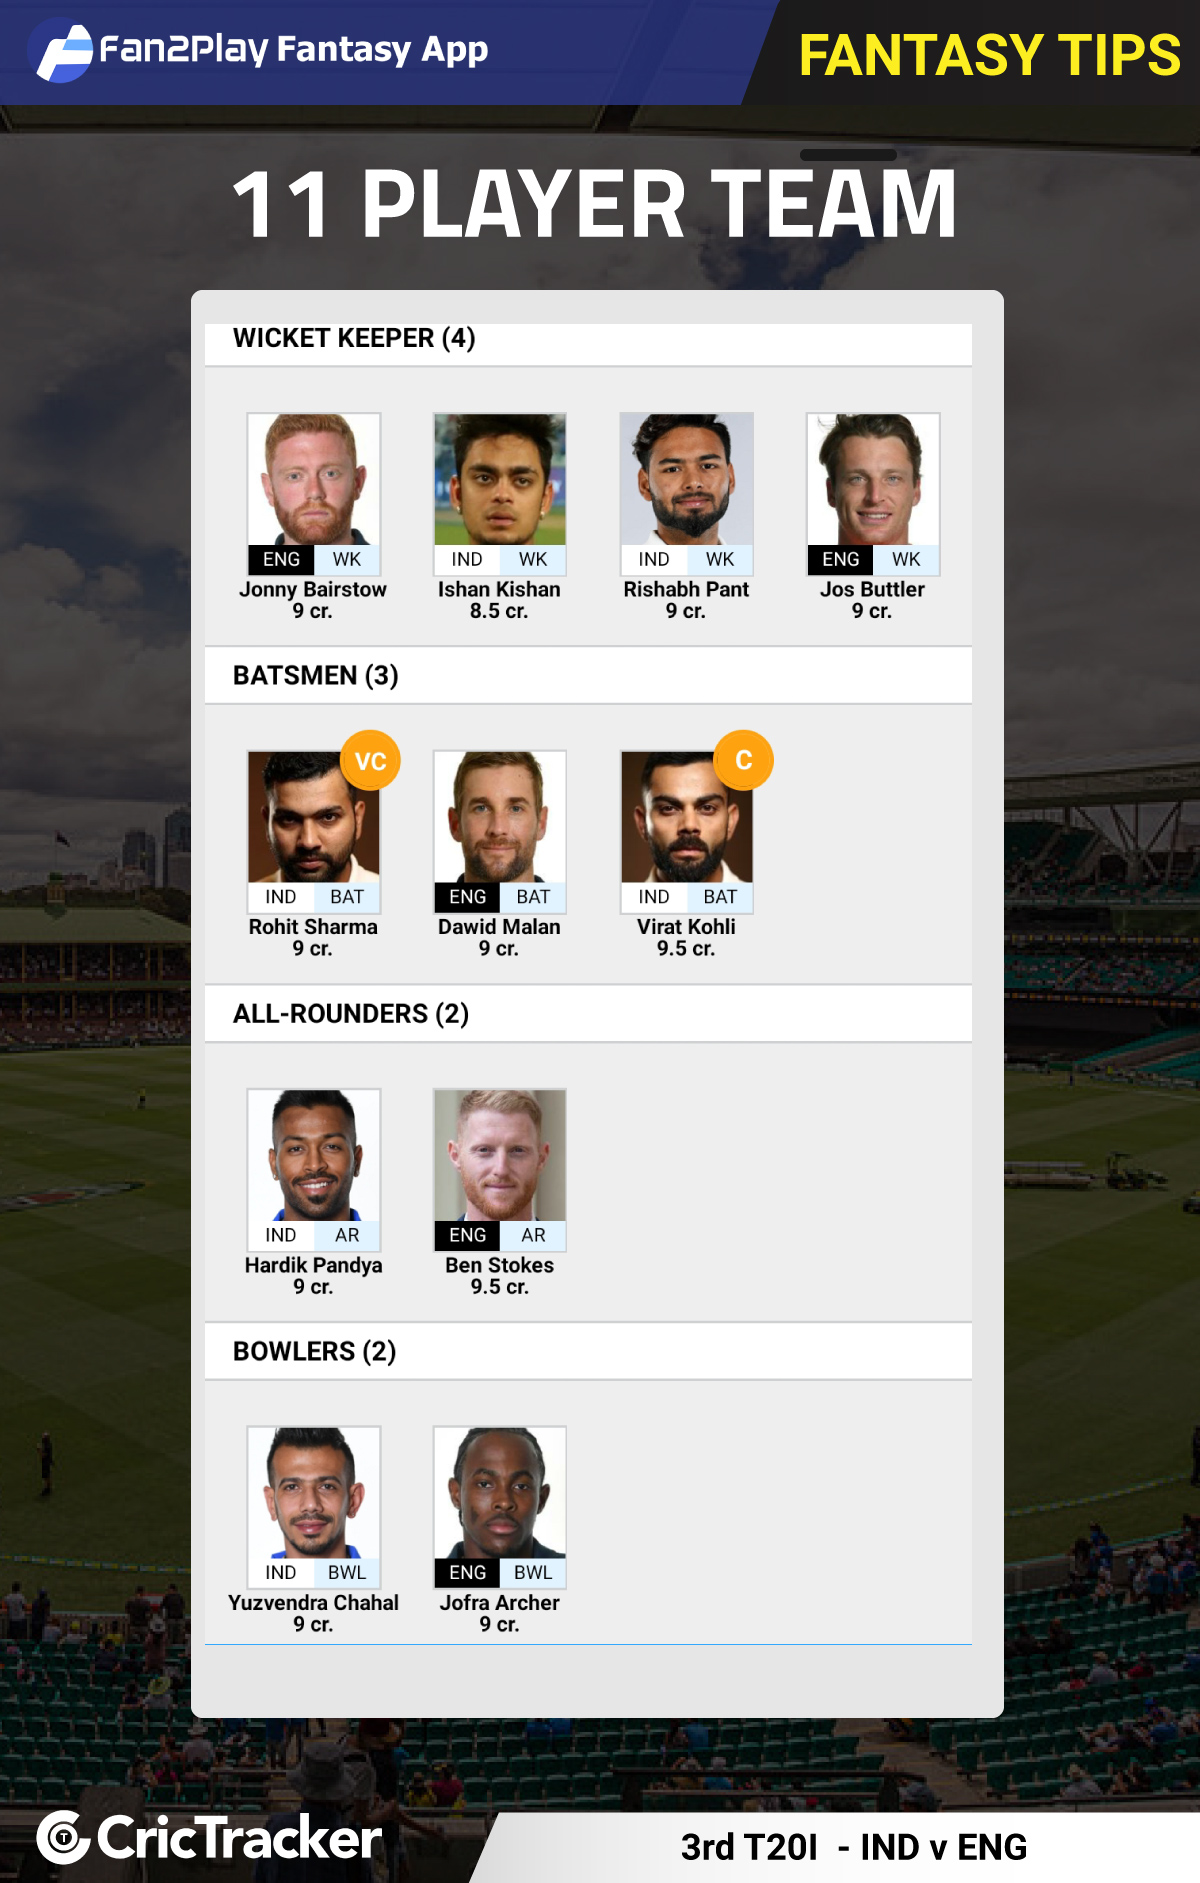 IND vs ENG, 3rd T20I - Fan2Play Fantasy Cricket Tips, Prediction, Playing XI and Pitch Report